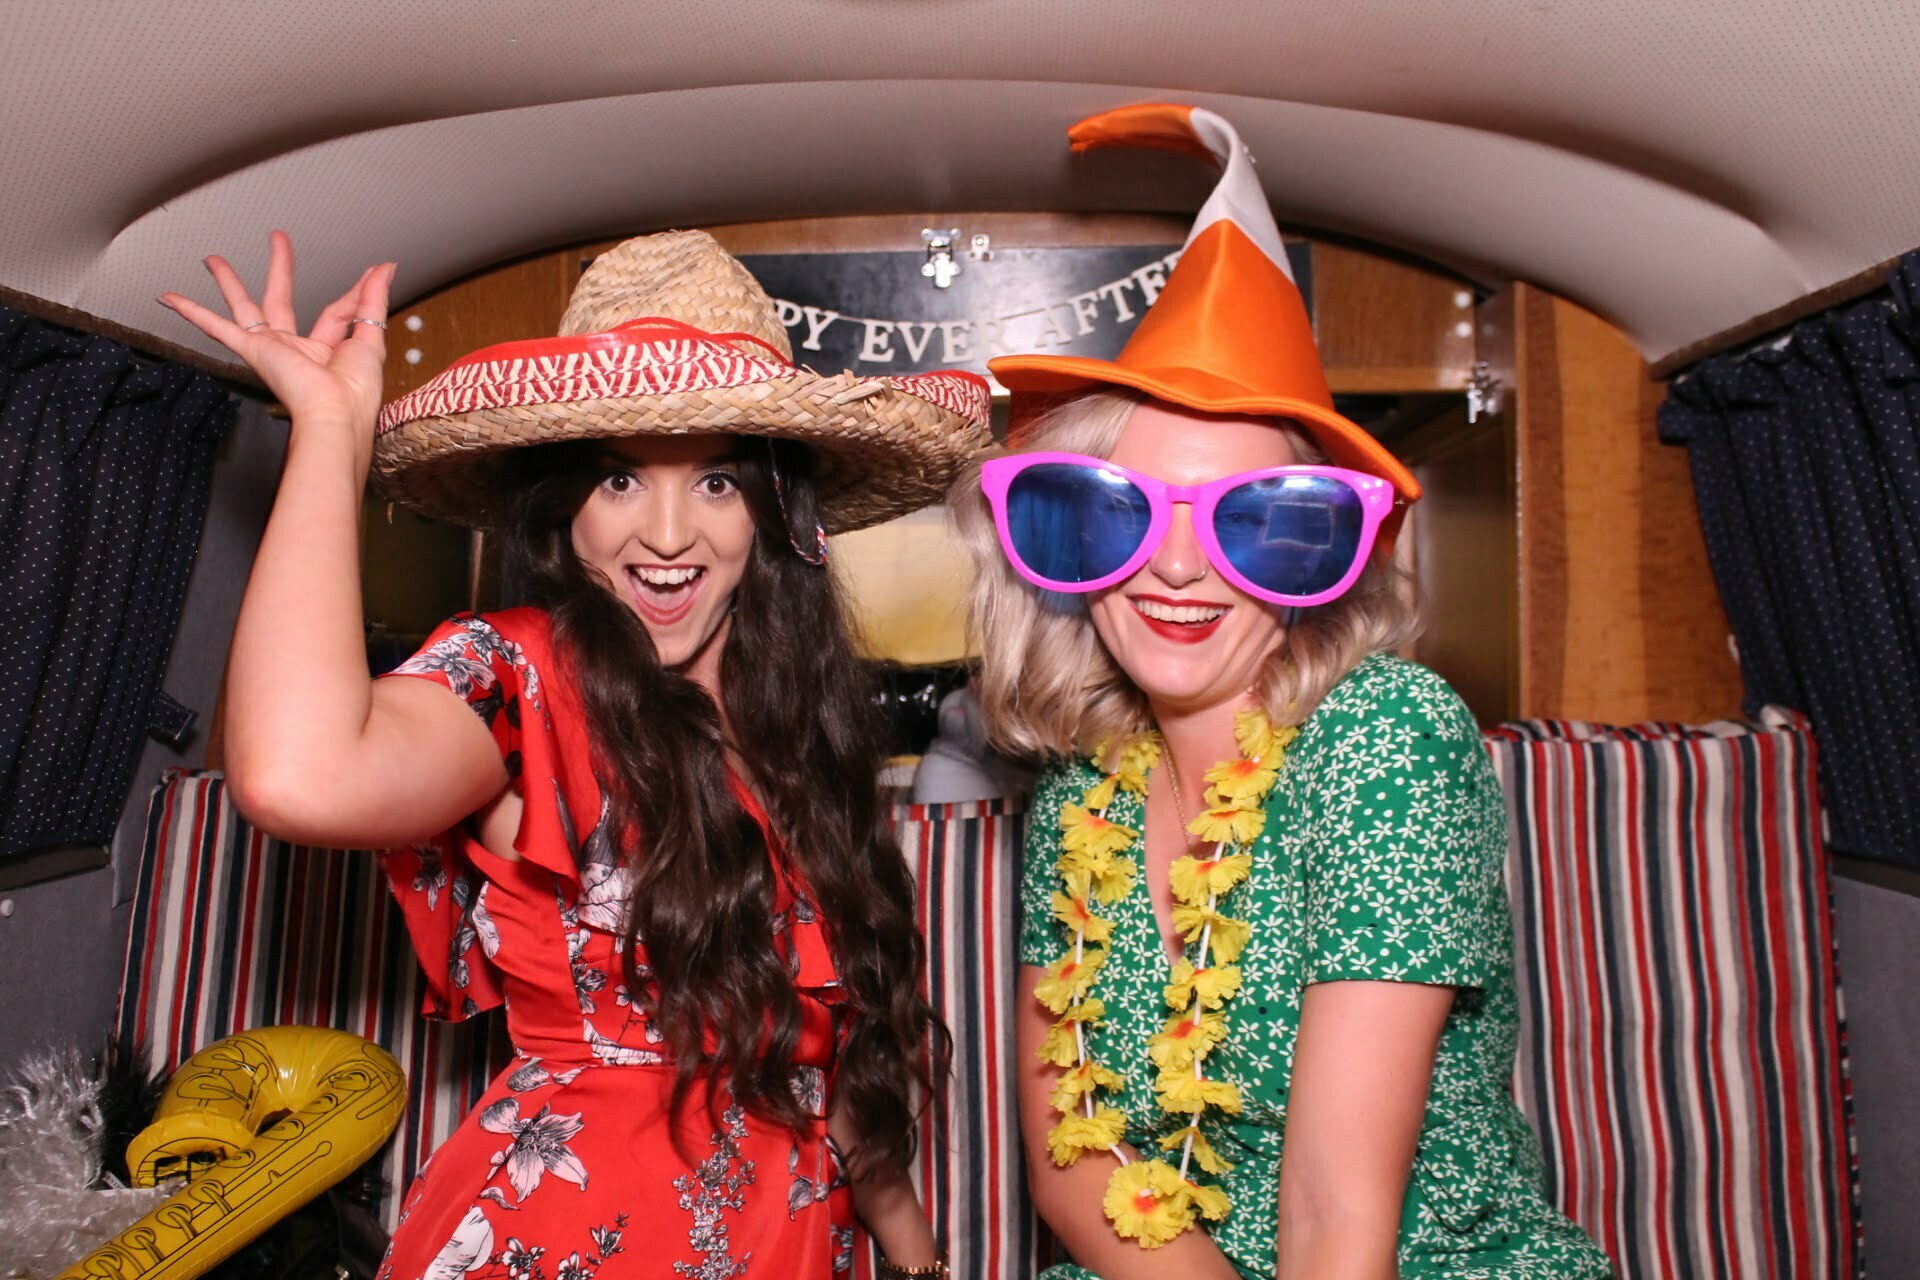 bride and bridesmaid having funny photos in the vw camper photo booth van